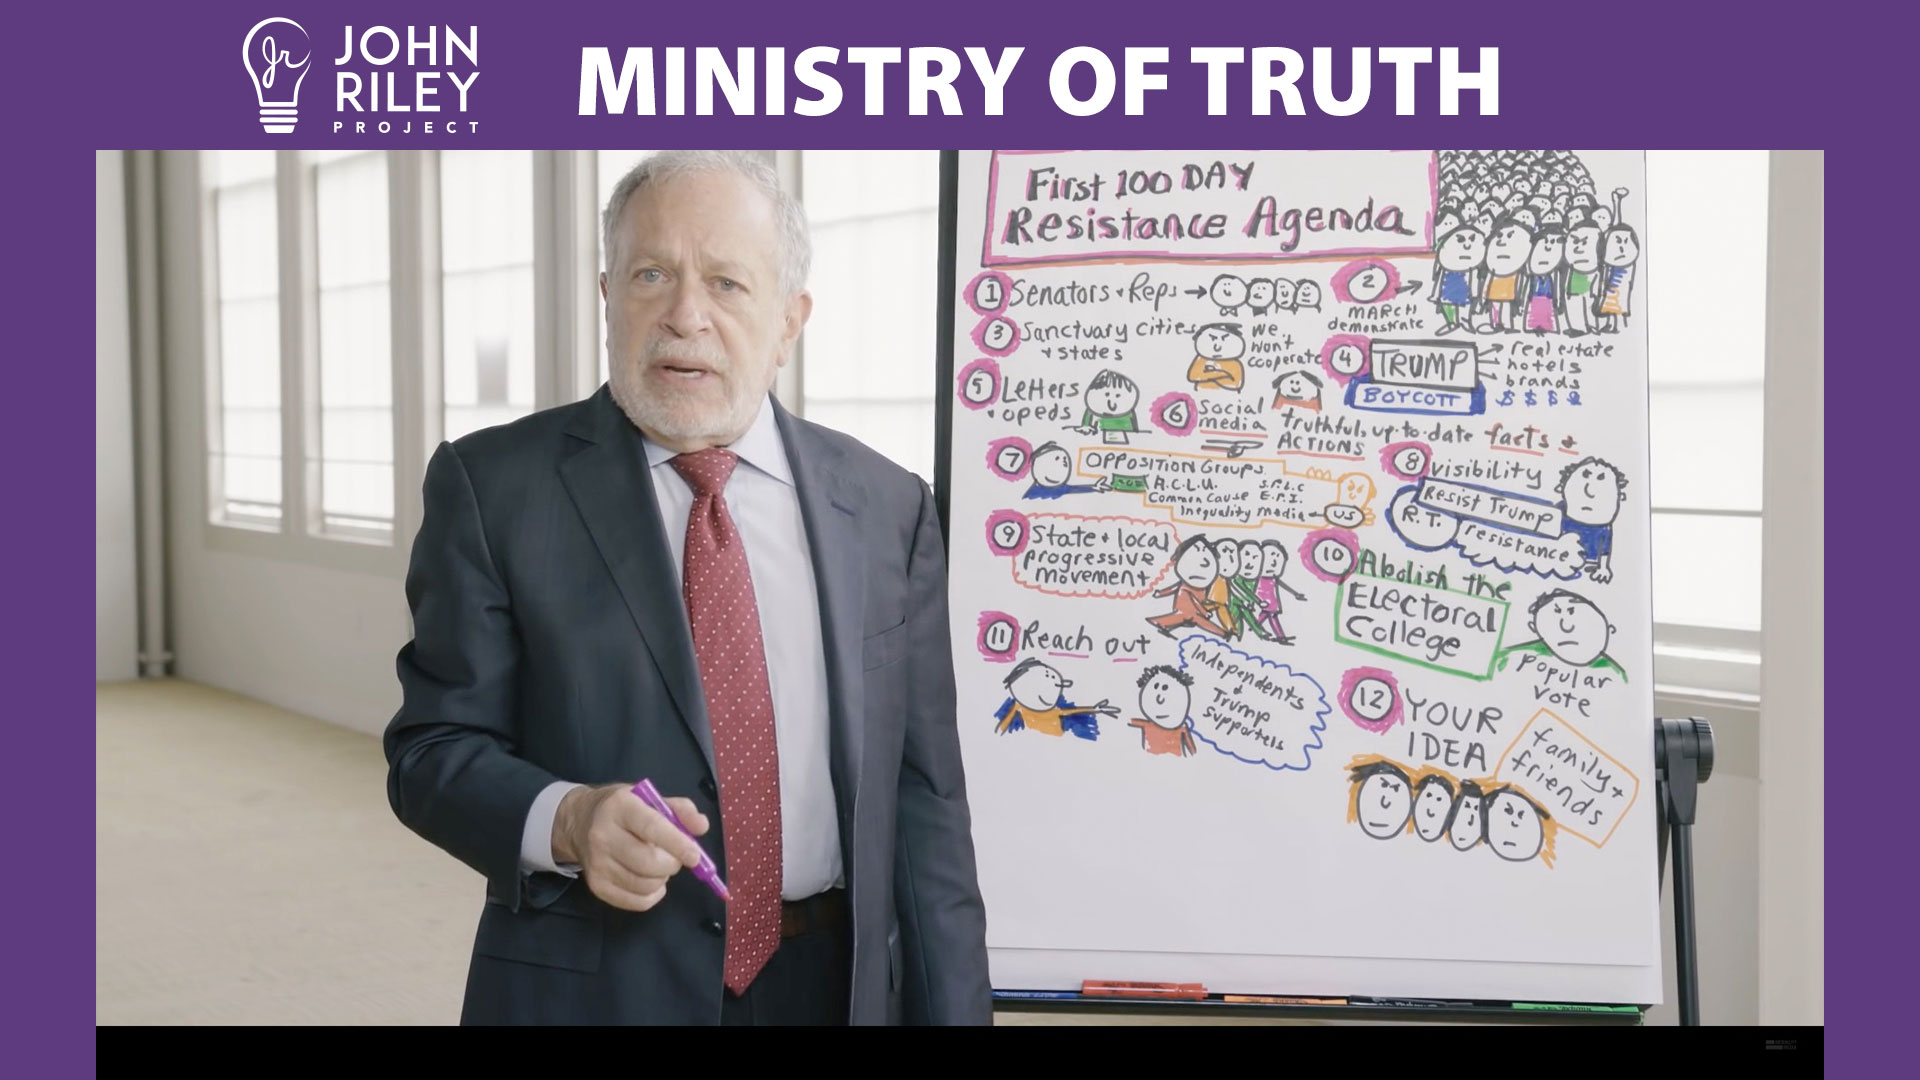 robert reich, ministry of truth, truth commission, Poway, John Riley Project, JRP0179